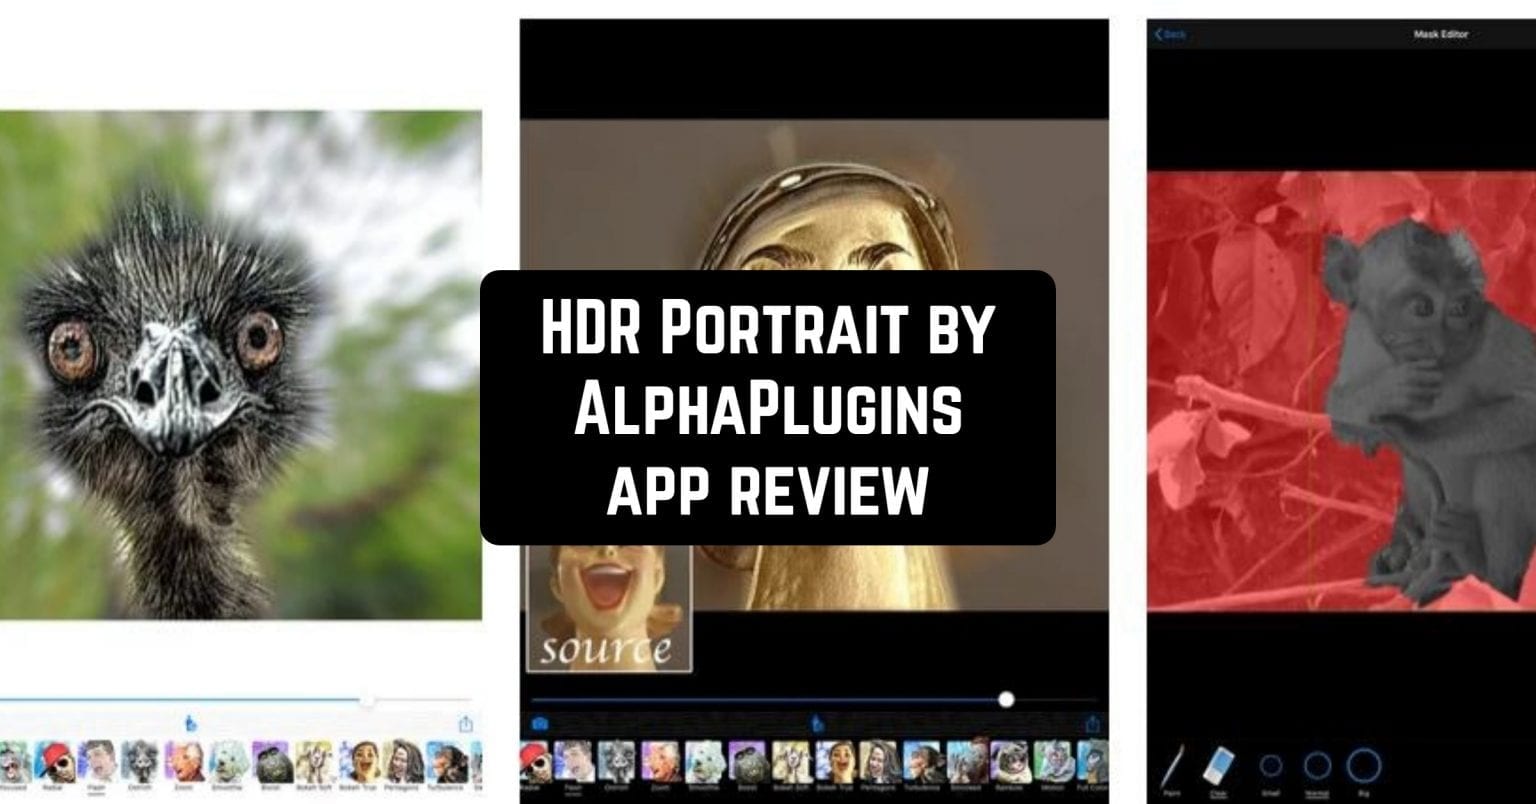 HDR Portrait by AlphaPlugins App Review - App pearl - Best mobile apps for Android & iOS devices